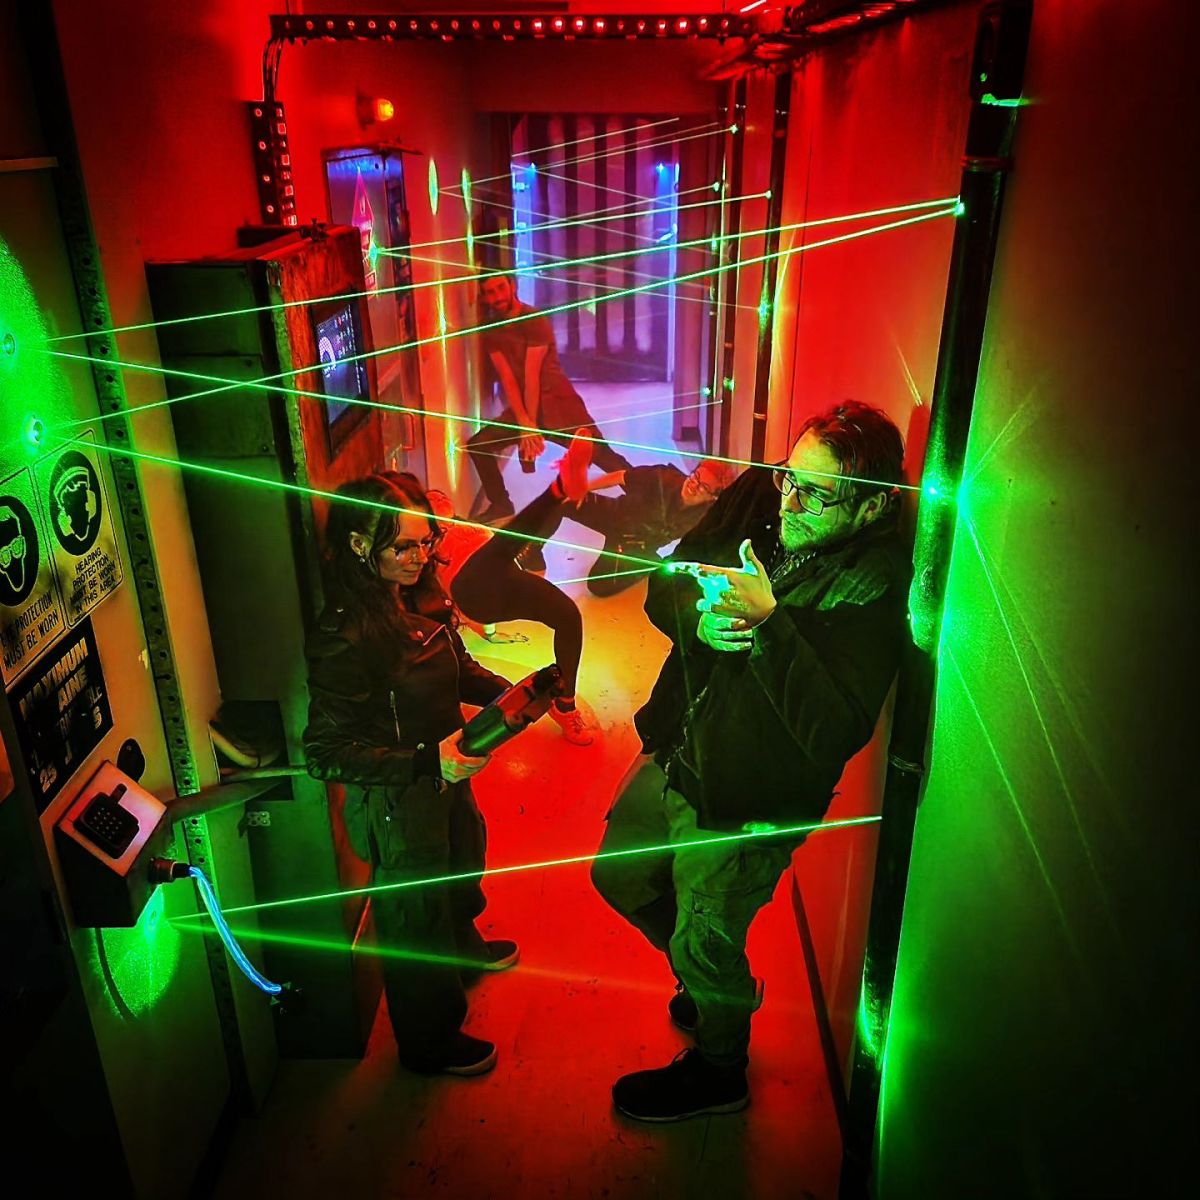 Several young people stand or lie in a corridor leaning against walls and surrounded by red light and green laser beams.